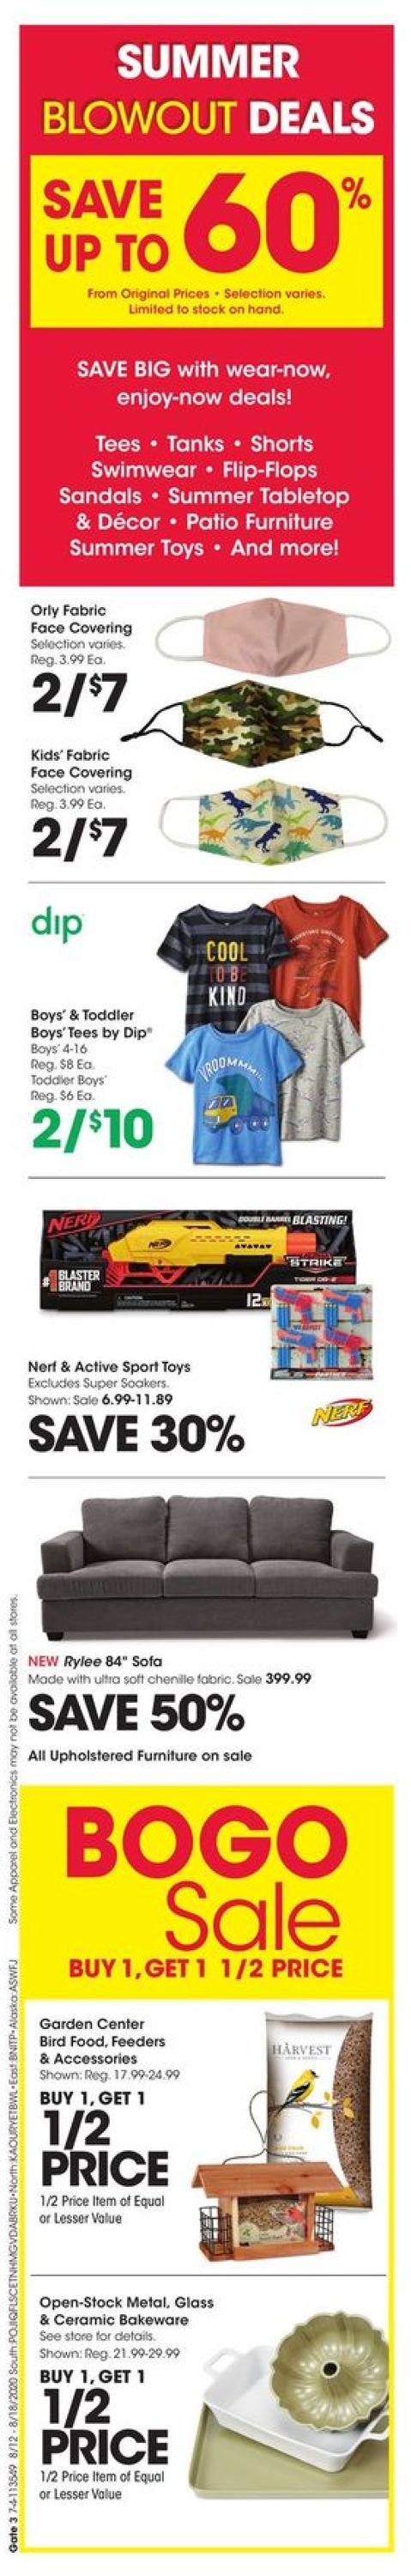 Fred Meyer Ad from 08/12/2020